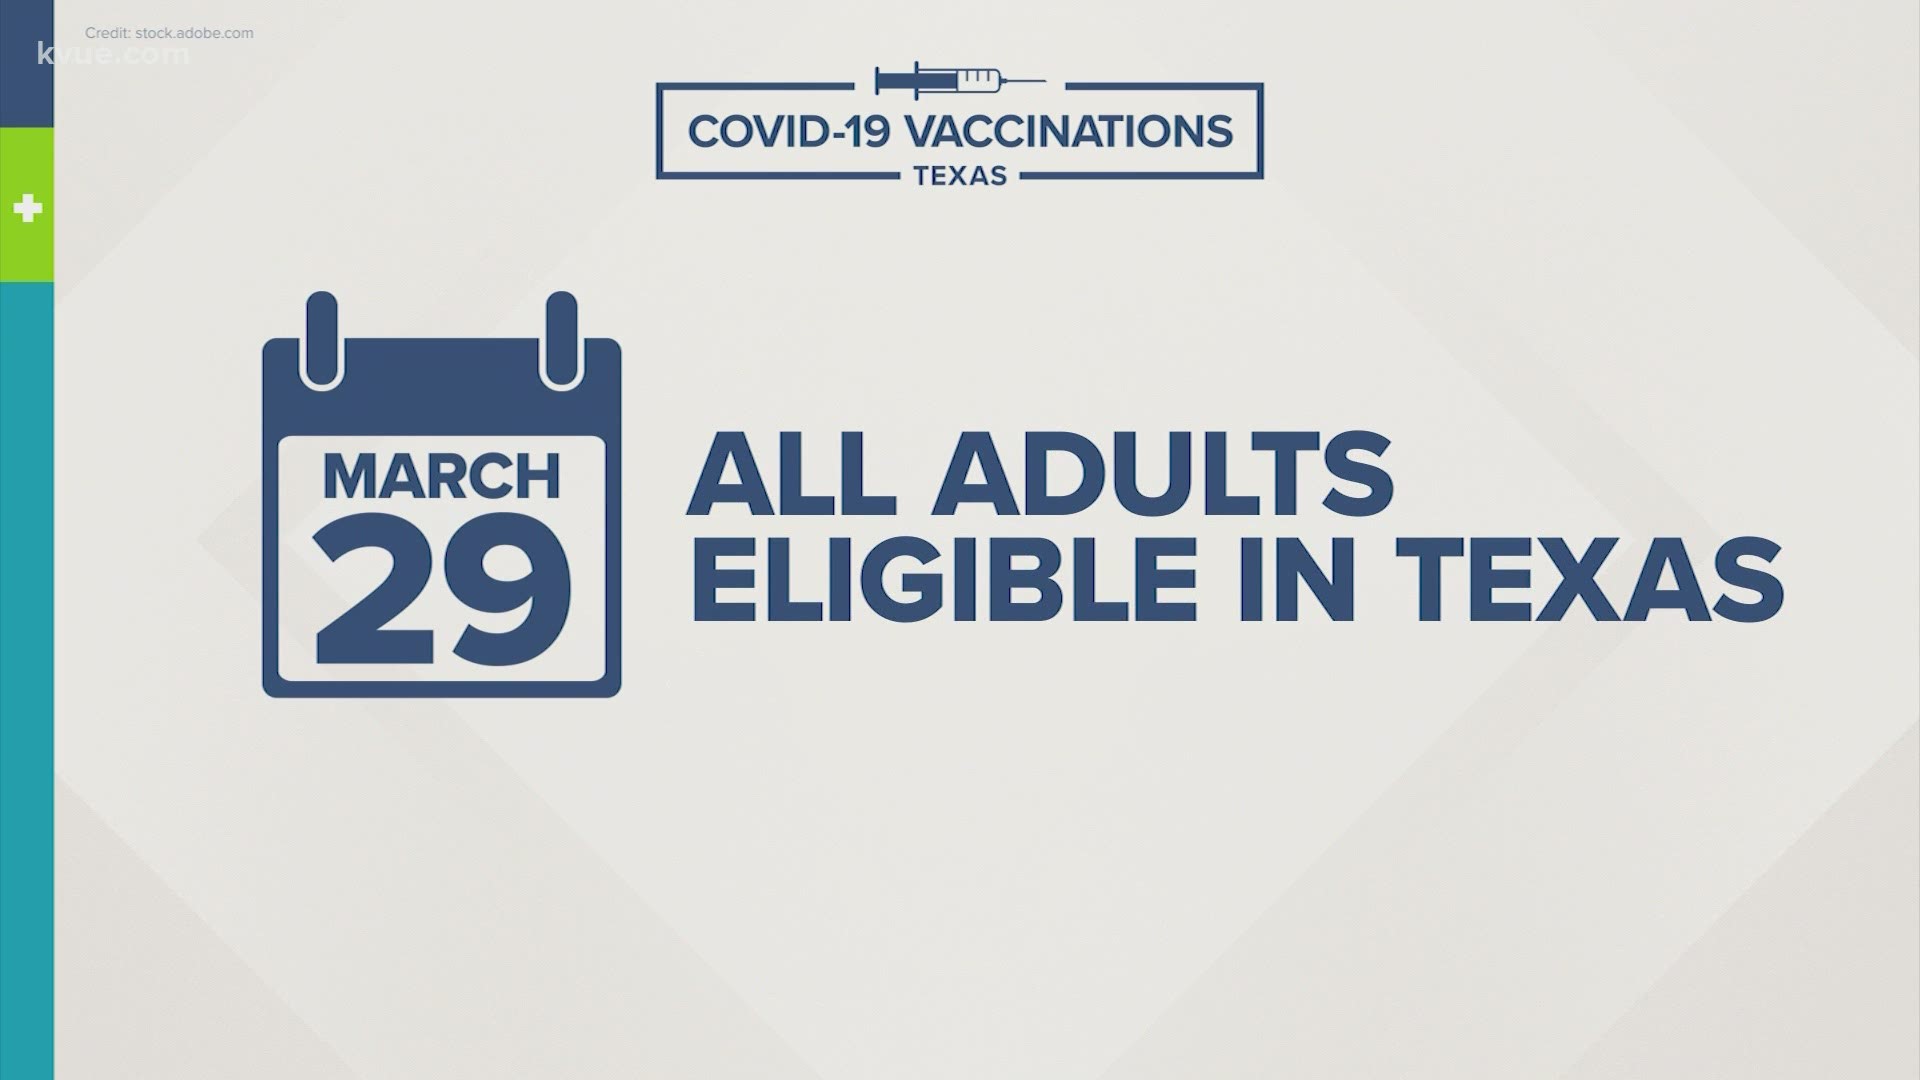 The state health department announced Tuesday that all adults will be eligible to get the vaccine starting Monday, March 29.